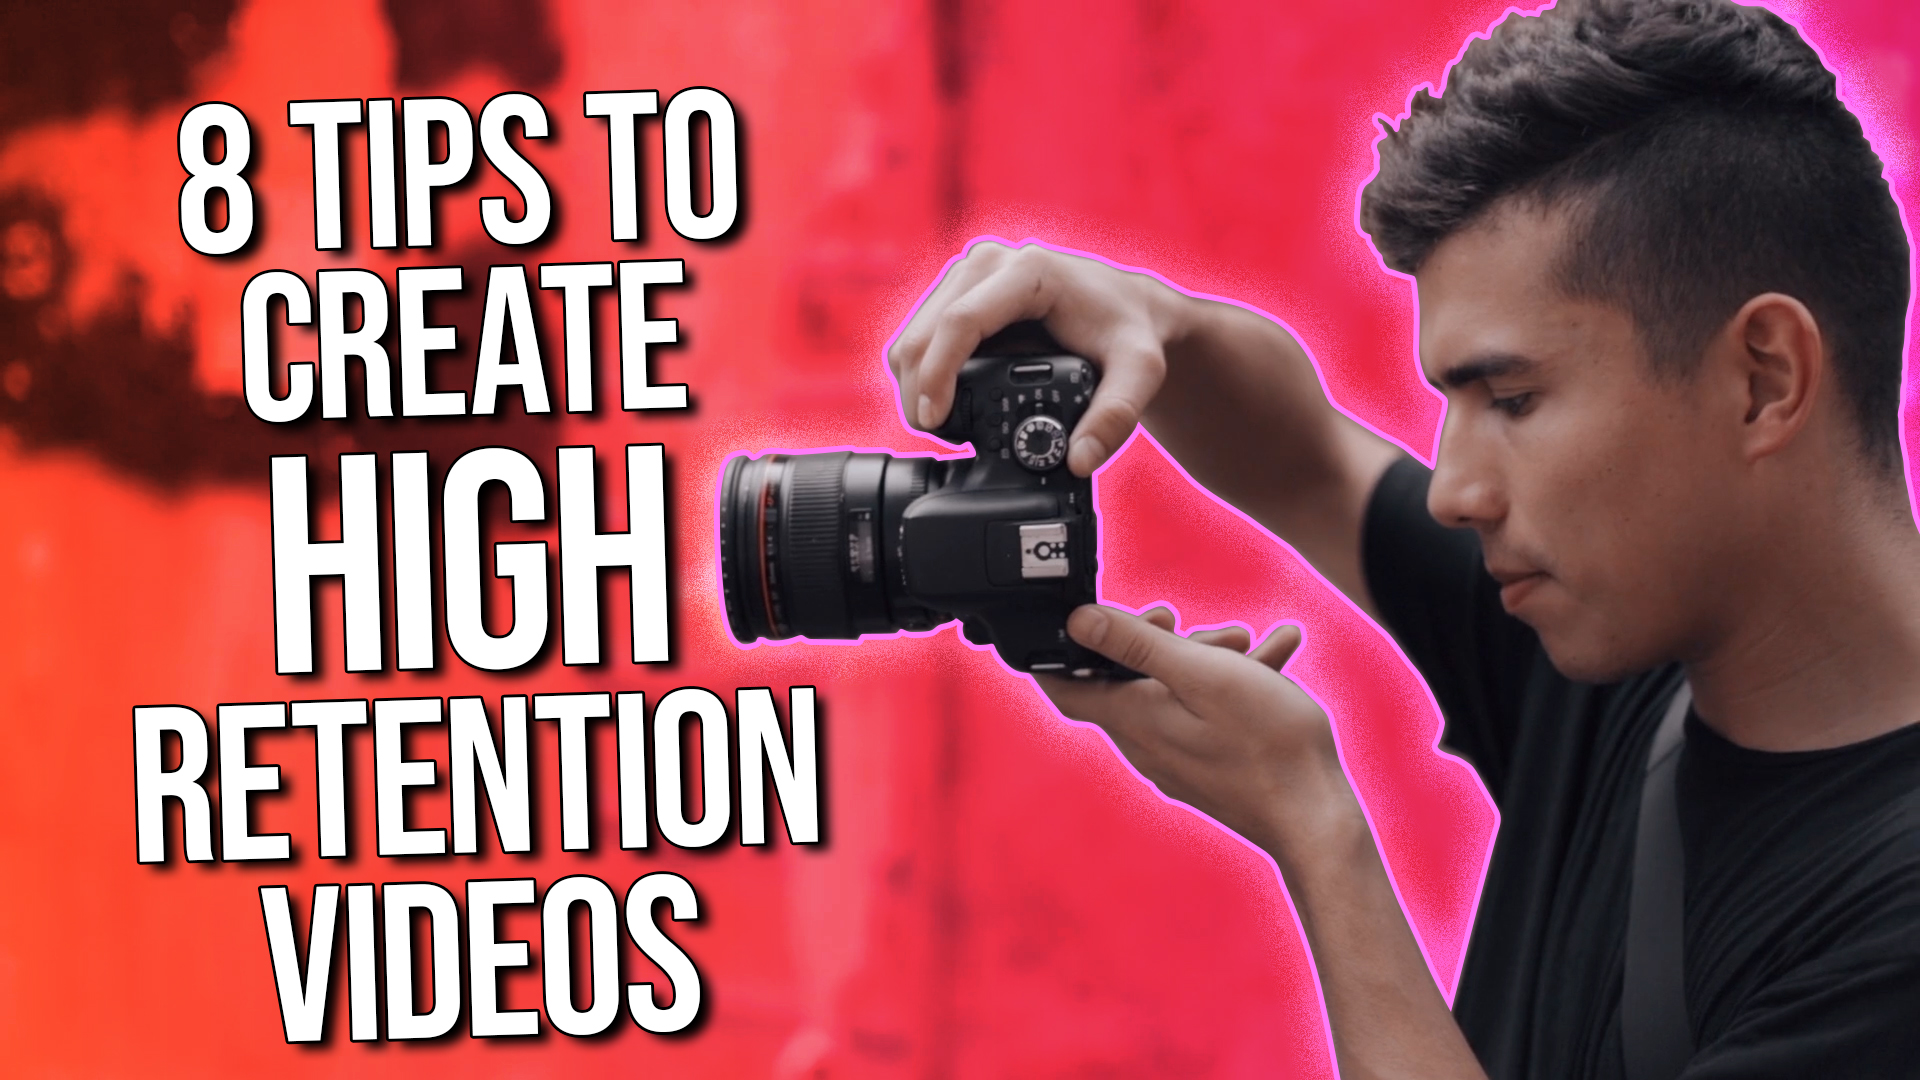 8 Tips to Create High Retention Videos for YouTube